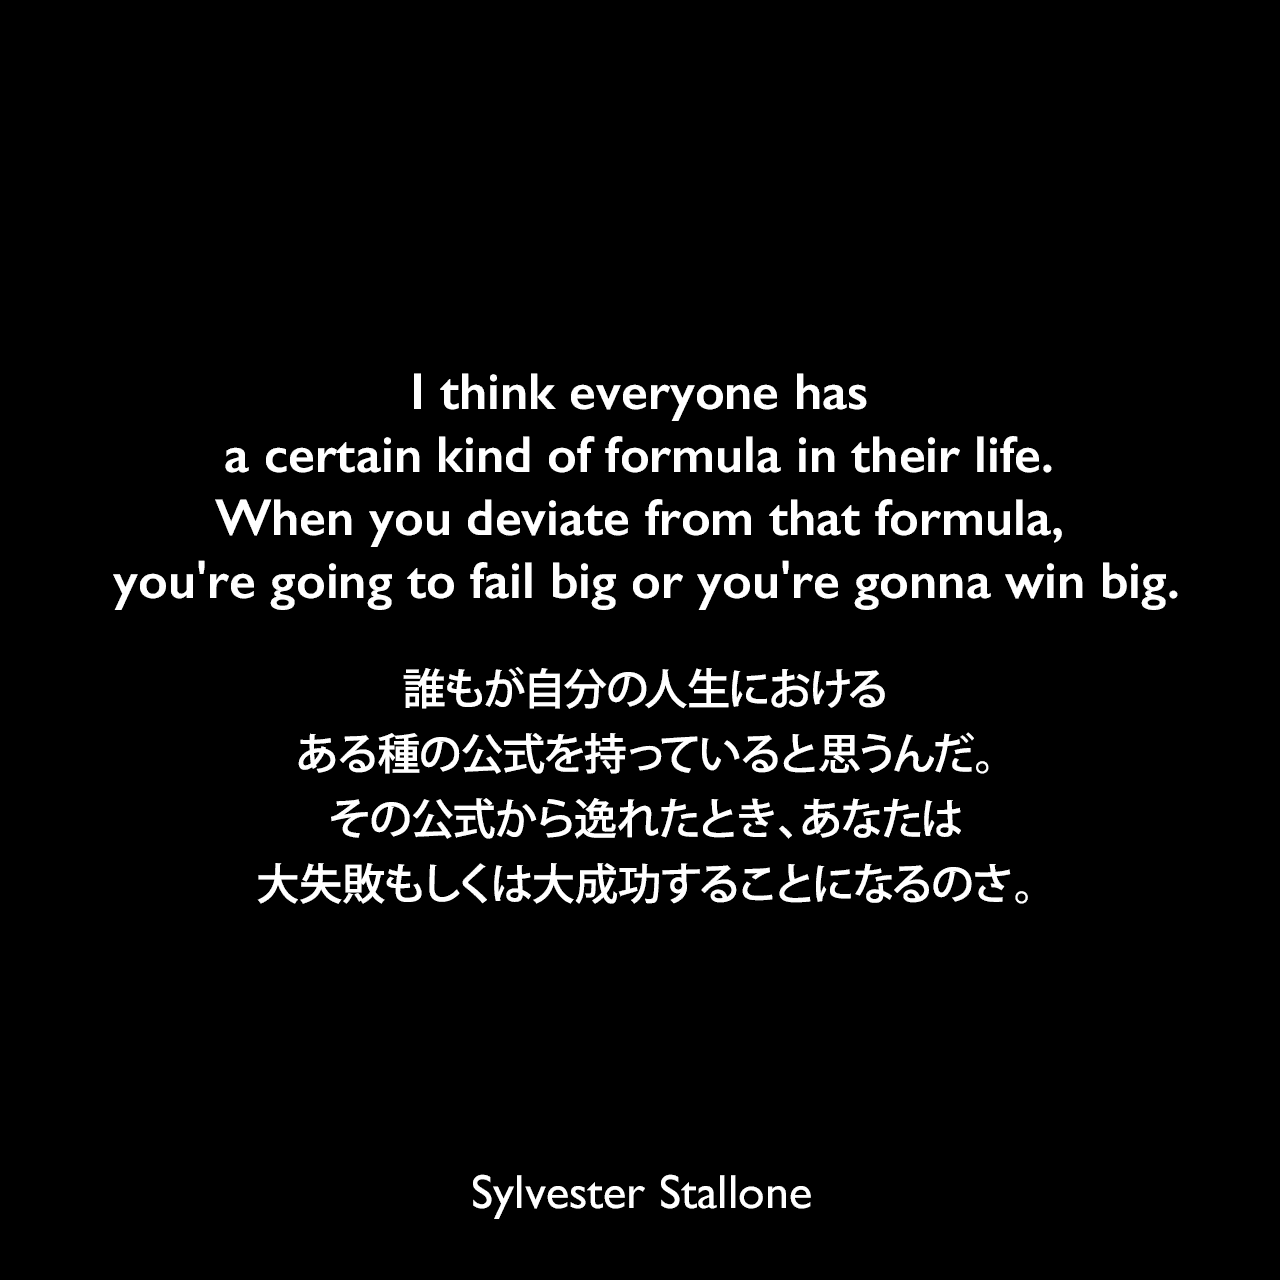 I think everyone has a certain kind of formula in their life. When you deviate from that formula, you're going to fail big or you're gonna win big.誰もが自分の人生における、ある種の公式を持っていると思うんだ。その公式から逸れたとき、あなたは大失敗もしくは大成功することになるのさ。